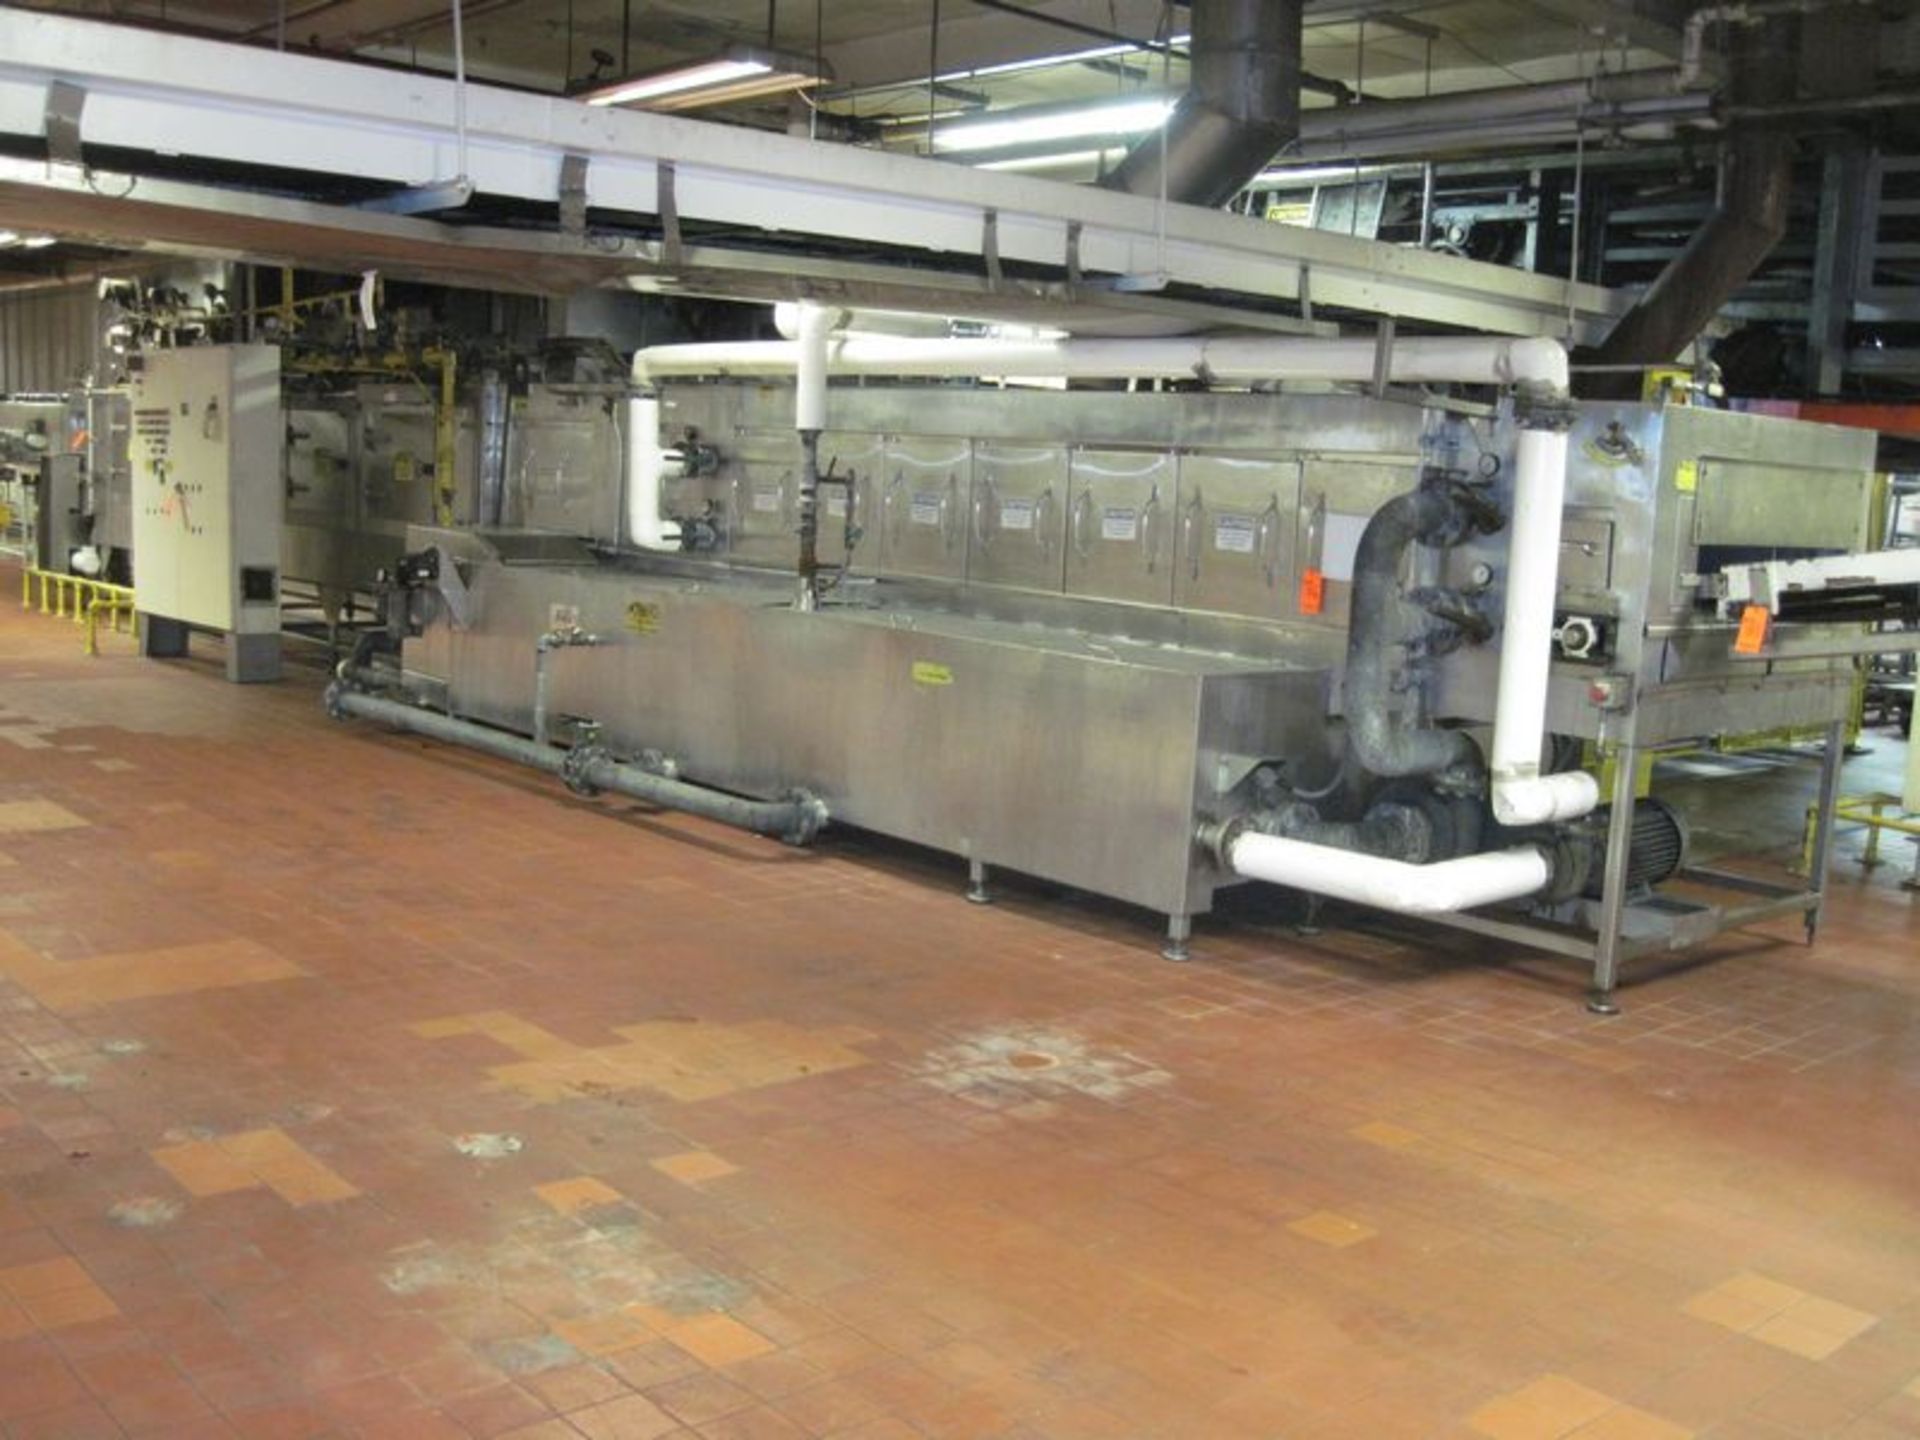 Alvey conveyorized pan washer. Approximate 44" wide x 48' long galvanized mesh belt. Stainless steel